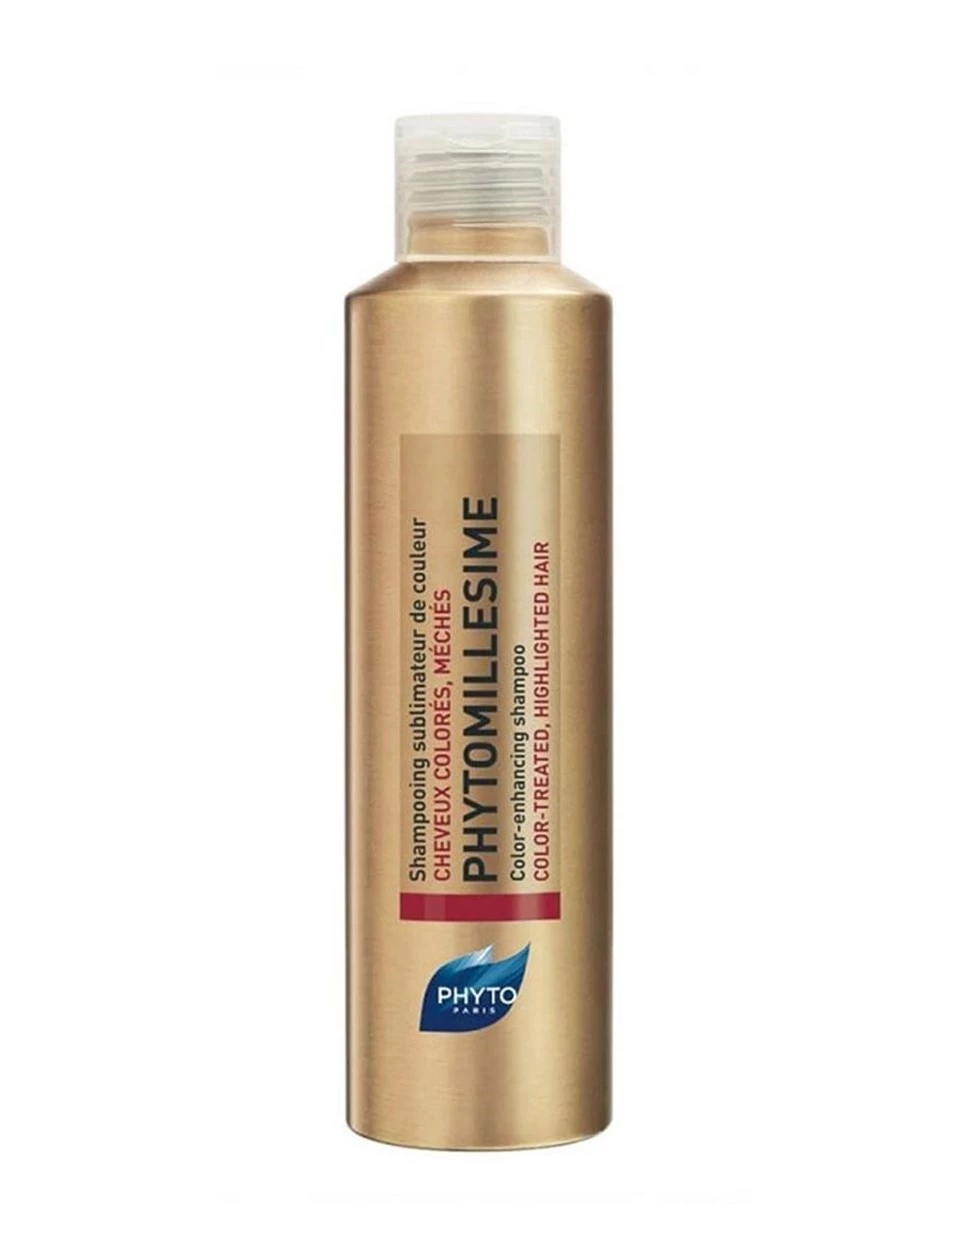 Phyto Phytomillesime Color Enhancing Shampoo 200ml